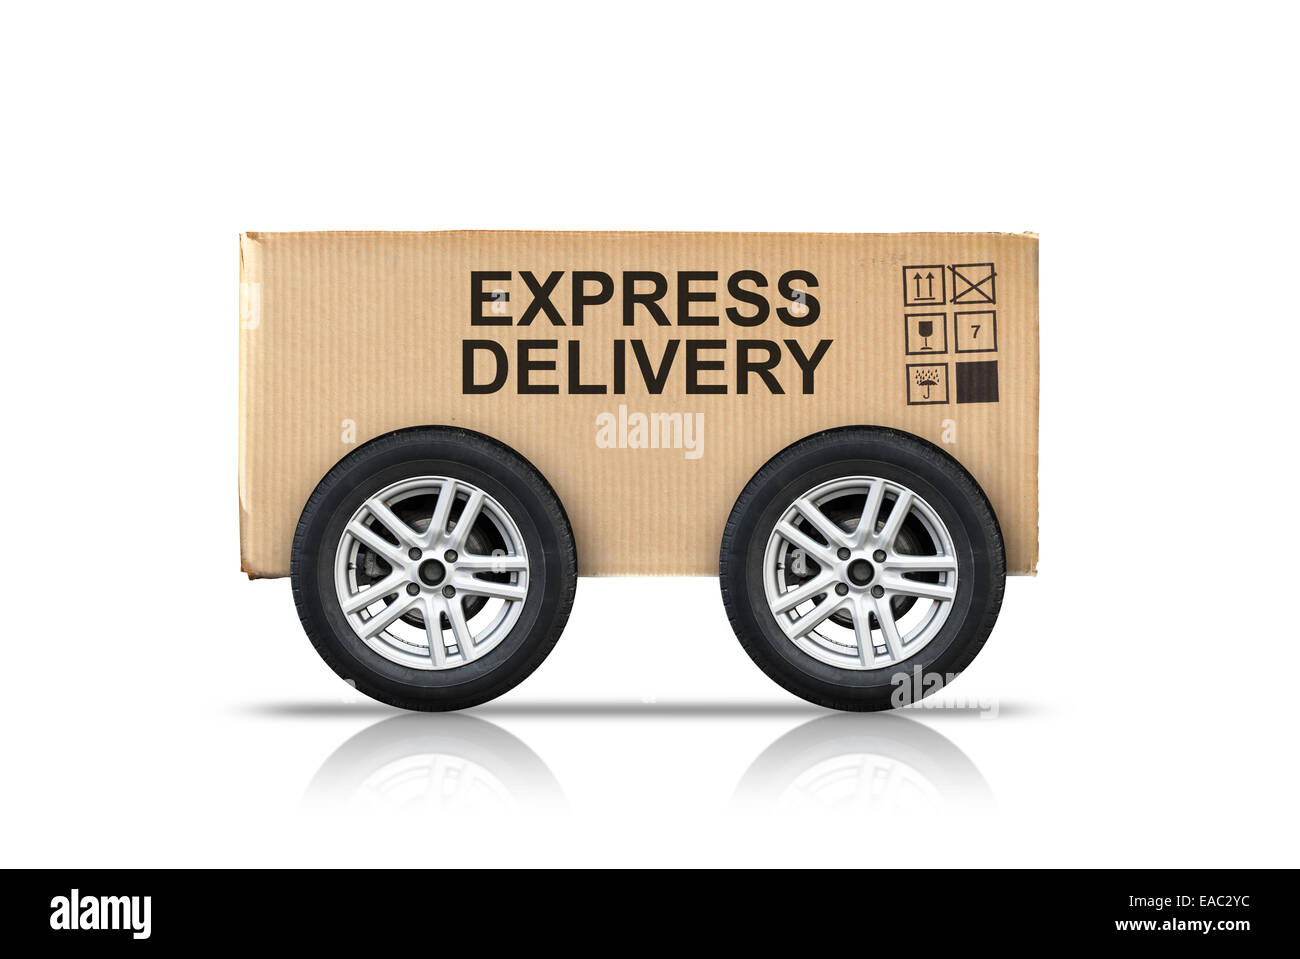 Cardboard box with standard signs and Express Delivery label on automotive wheels isolated on white background Stock Photo